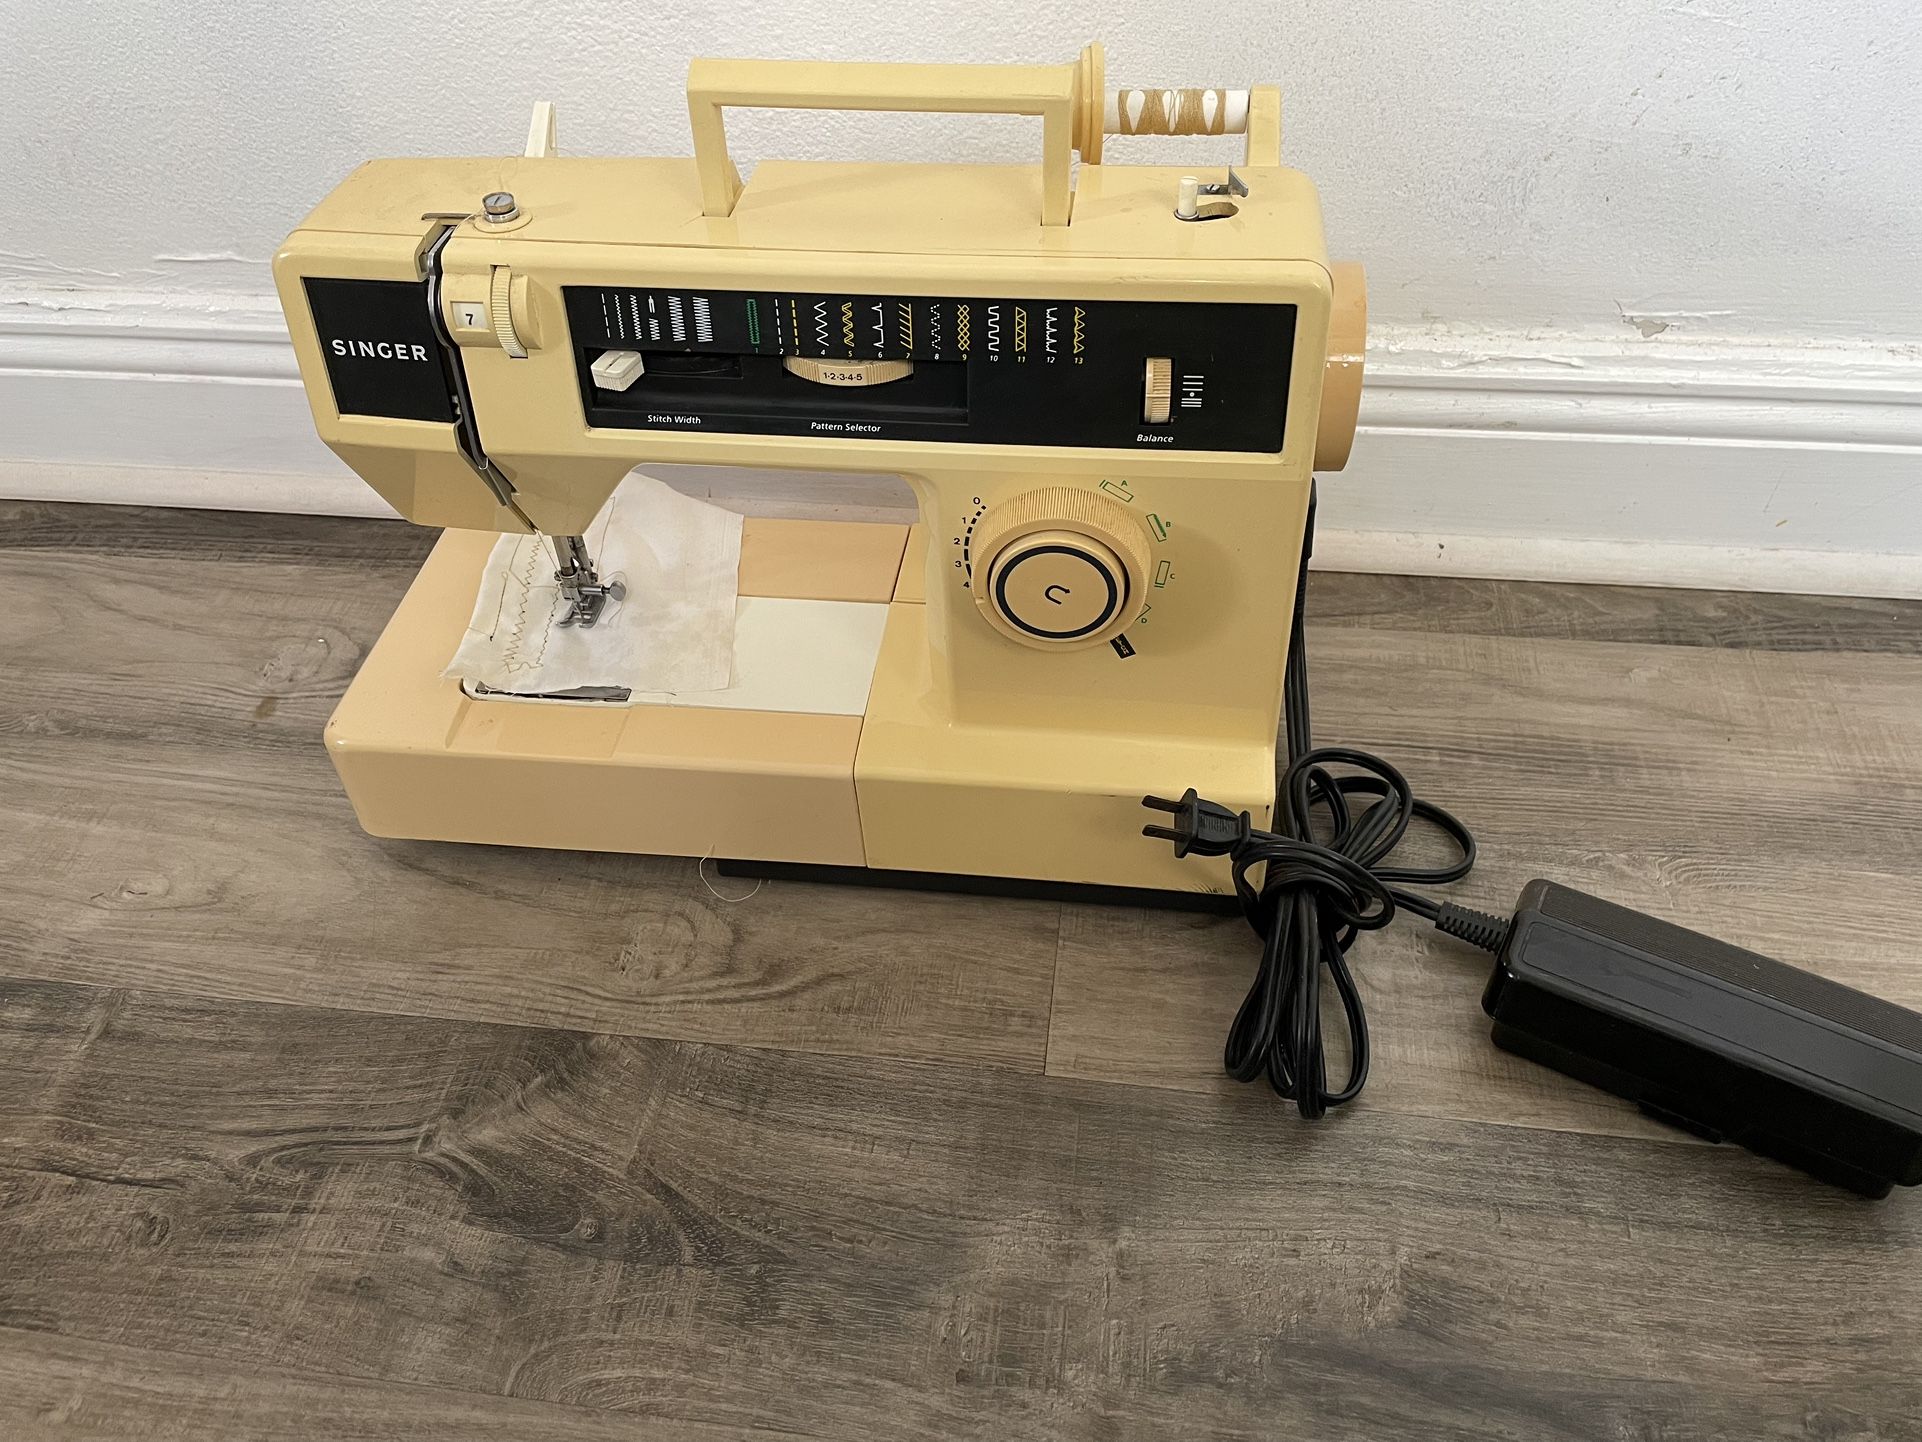 Singer 1544180 Sewing Machine Working $50 Firm On Price